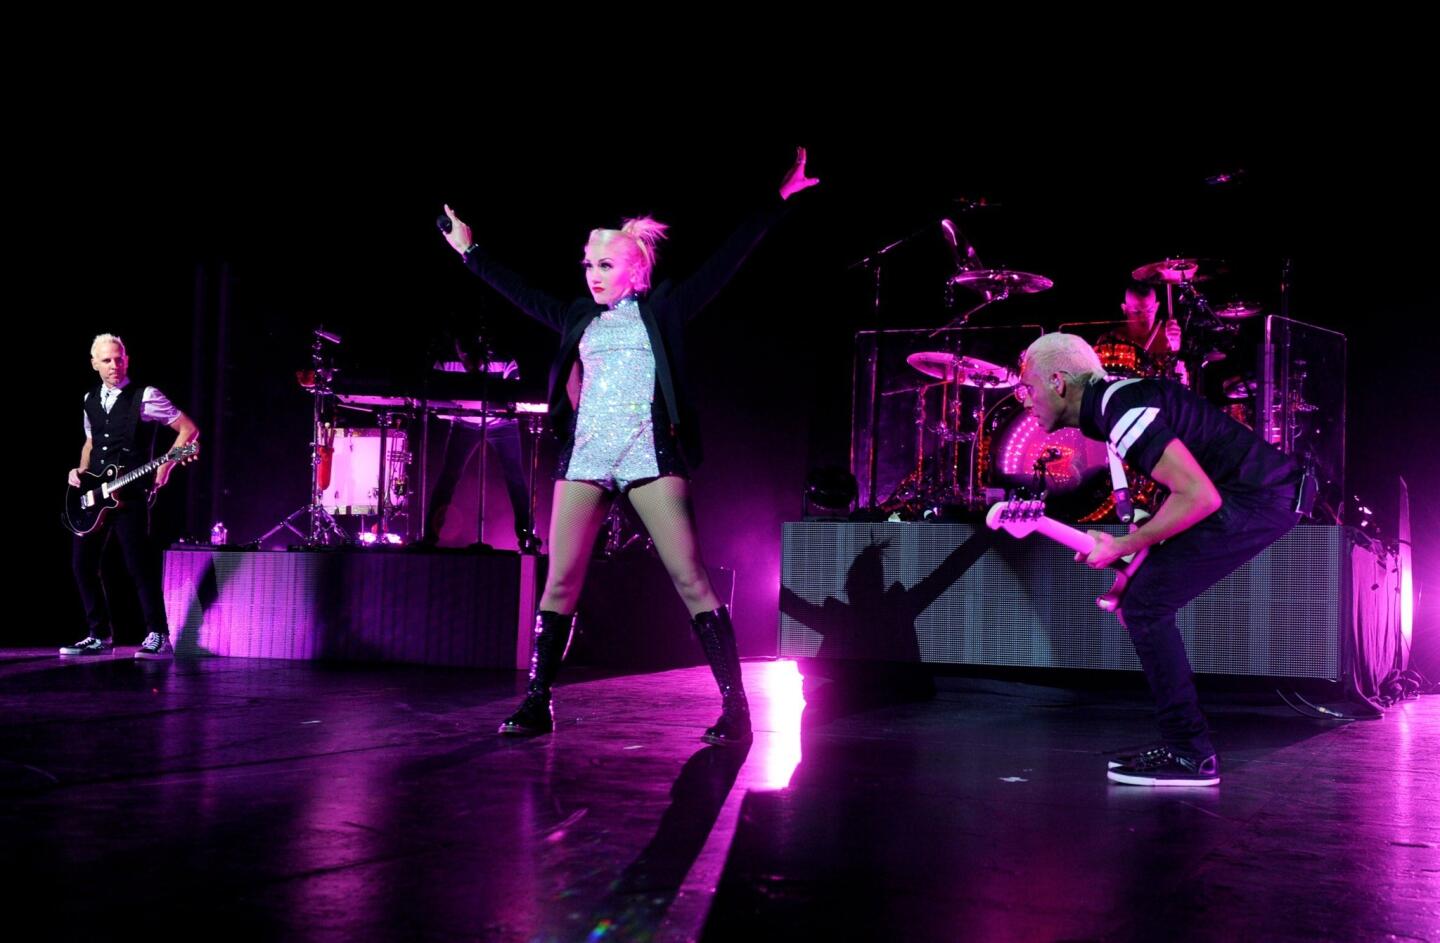 Musician Tom Dumont, singer Gwen Stefani, musician Tony Kanal and Adrian Young of No Doubt perform.